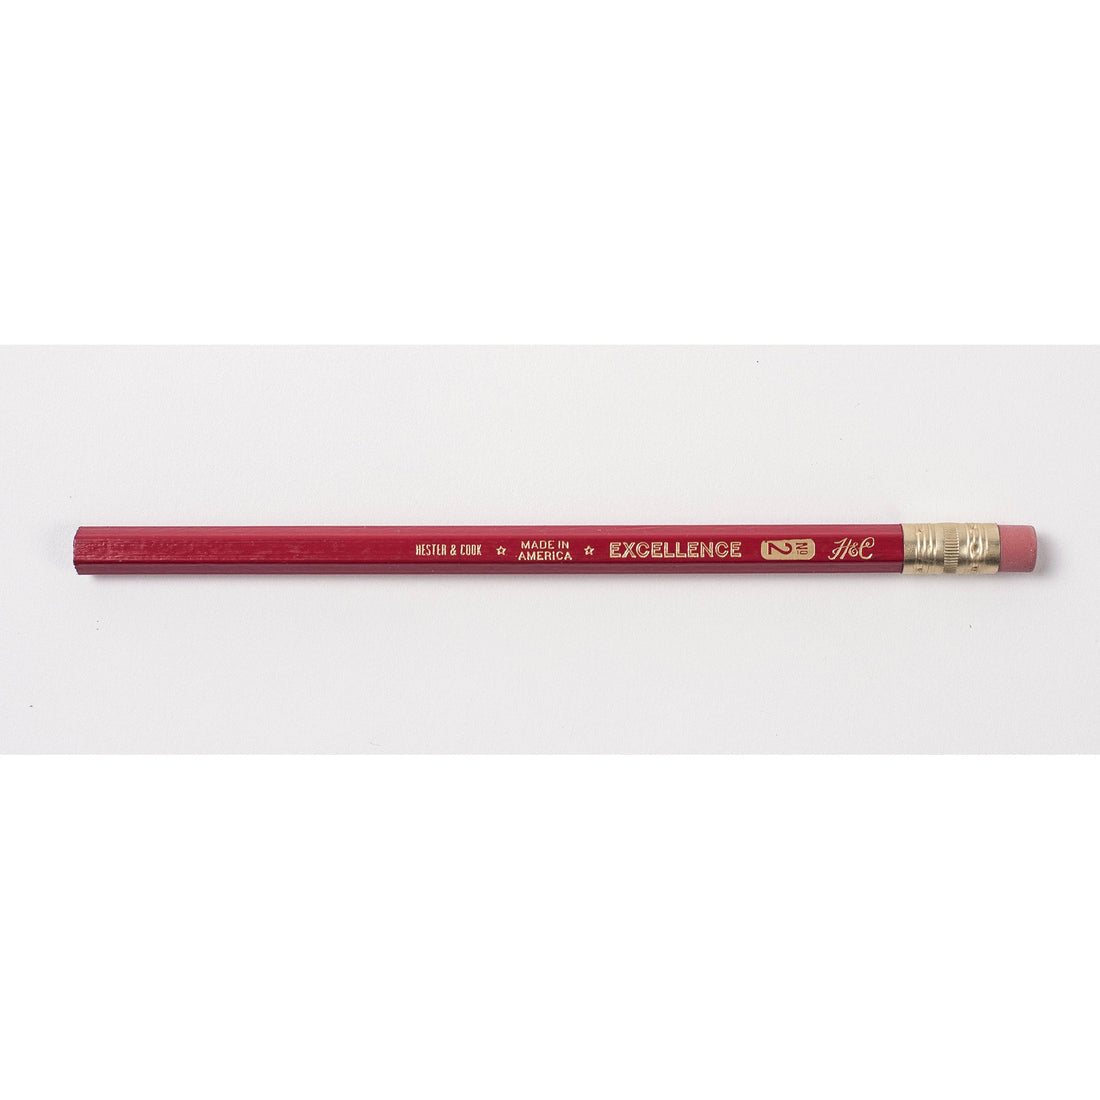 A Jumbo Hex Pencil by Hester &amp; Cook on a white background.